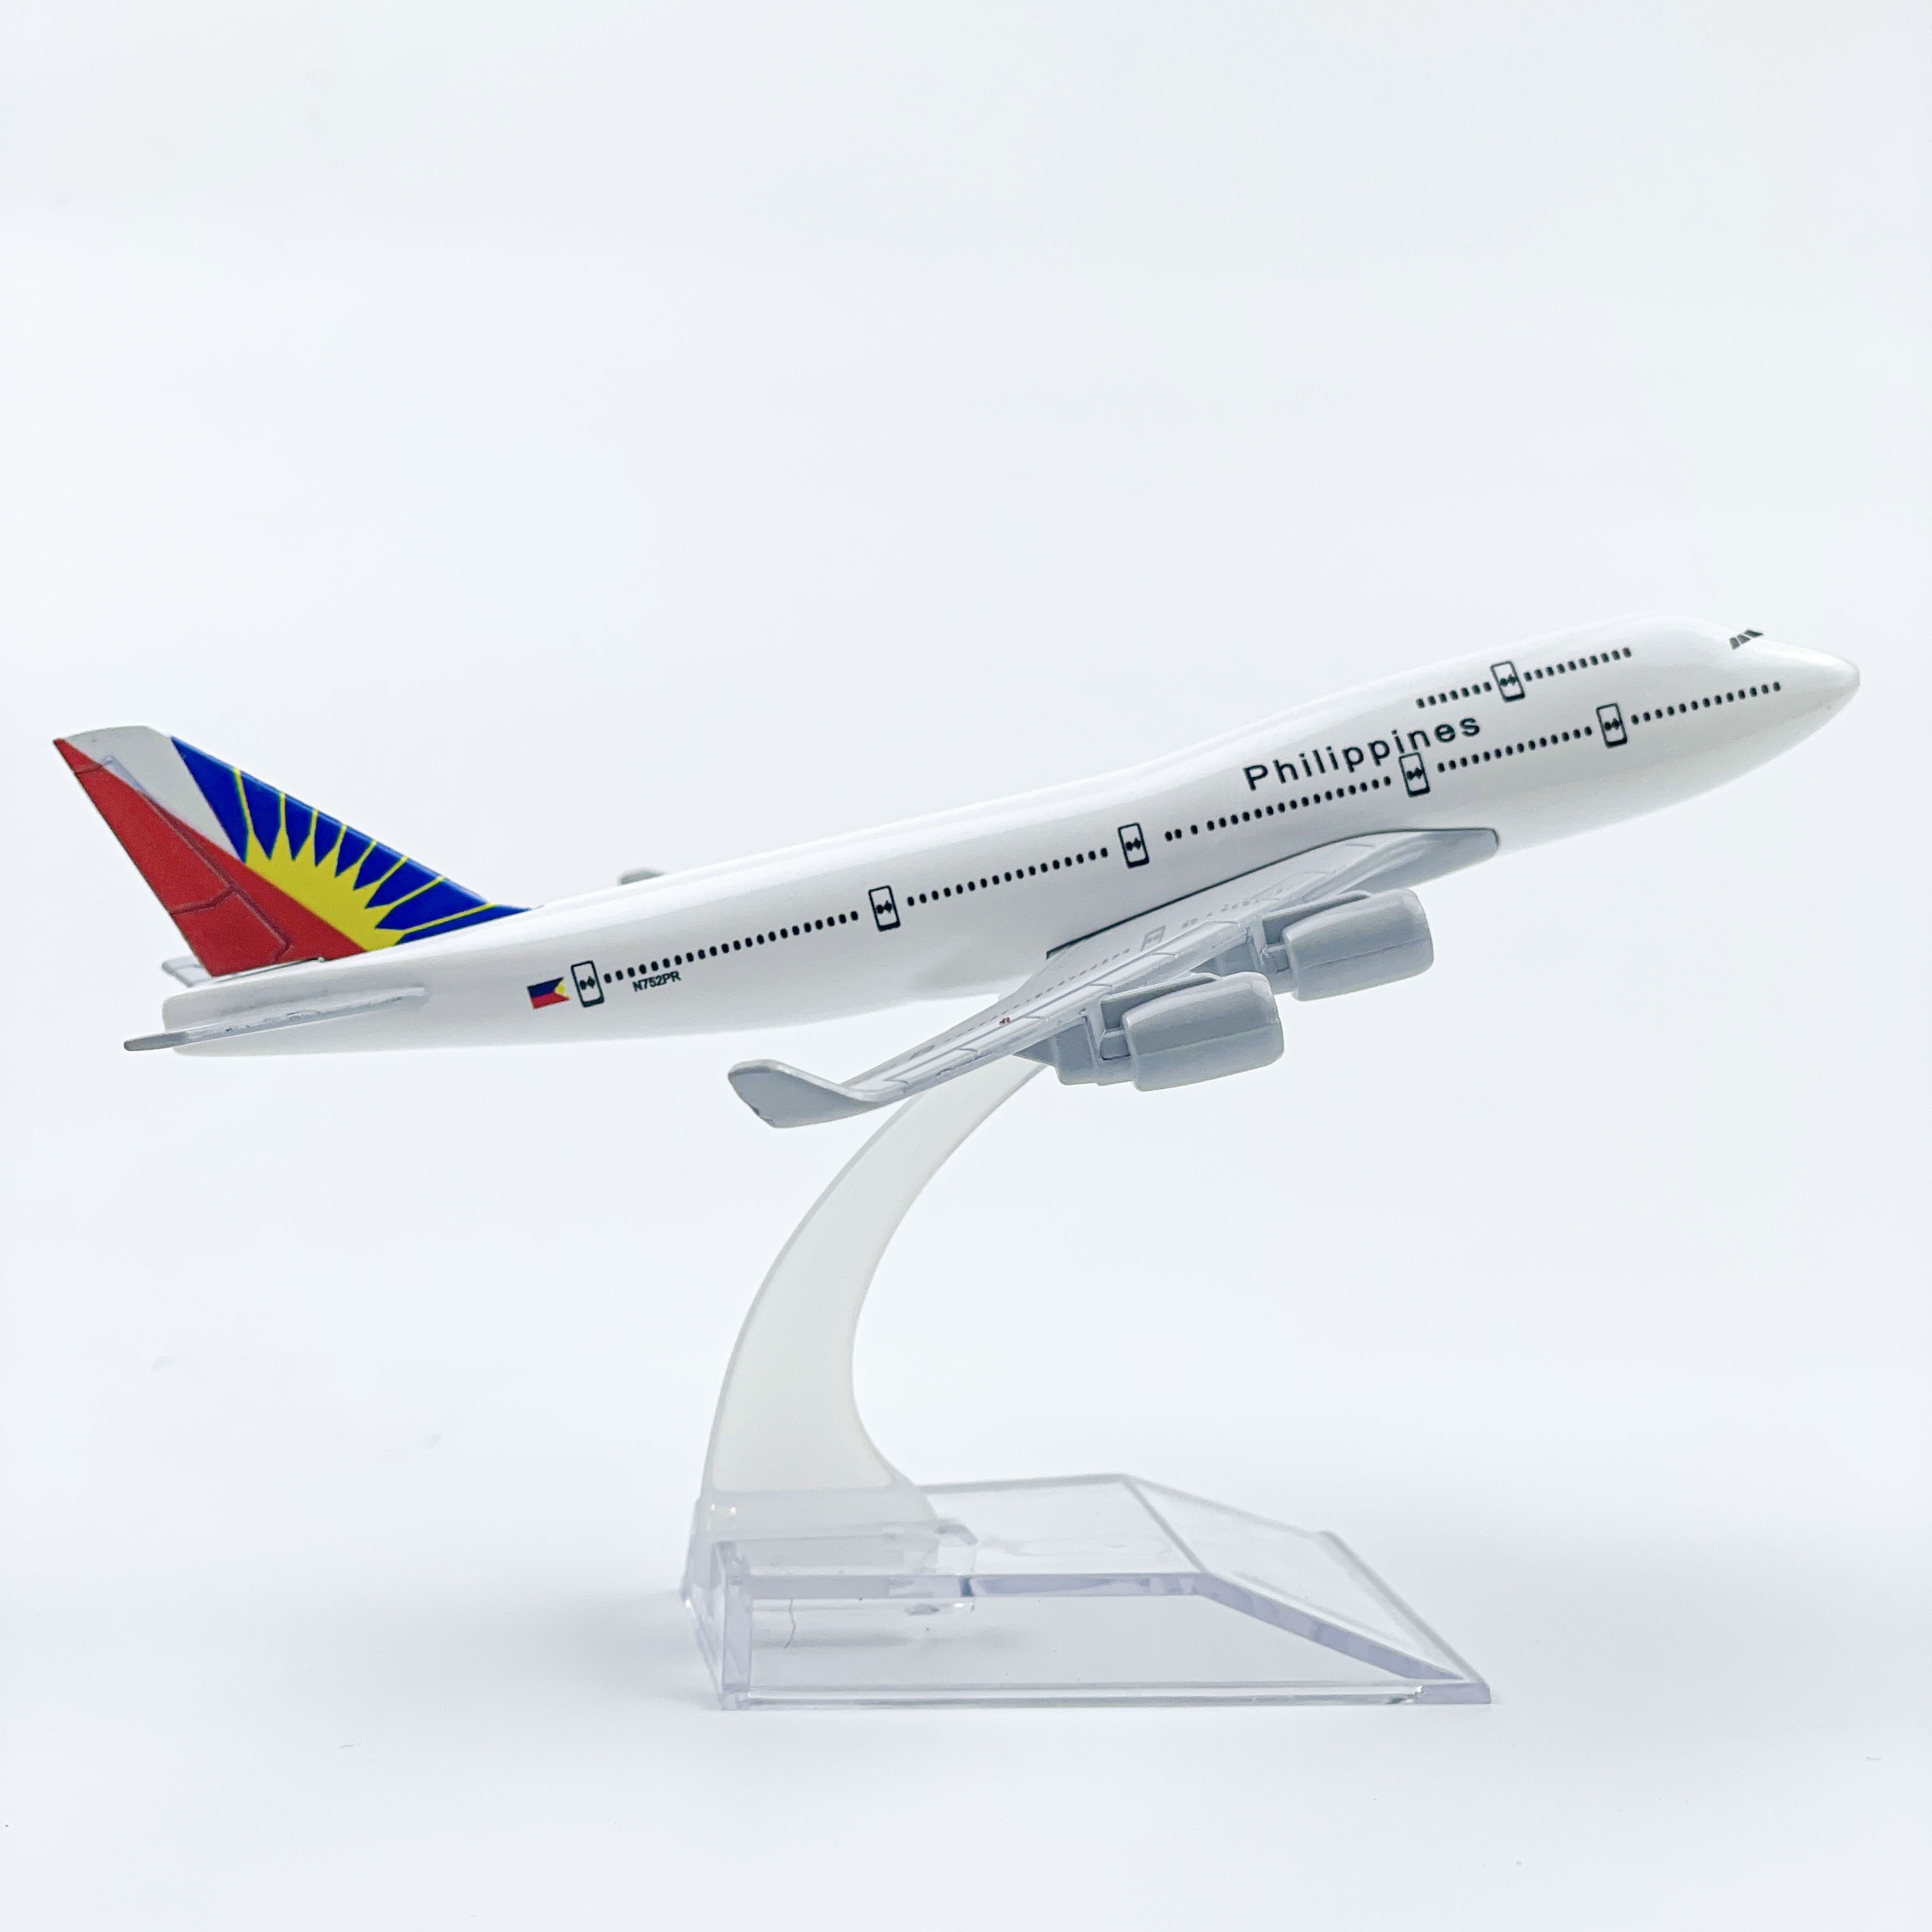 

boeing 747" Boeing 747 Die-cast Metal Airplane Model, 6.3" Philippine Airlines Edition - Perfect For Collectors & Gifts, Ages 3-12